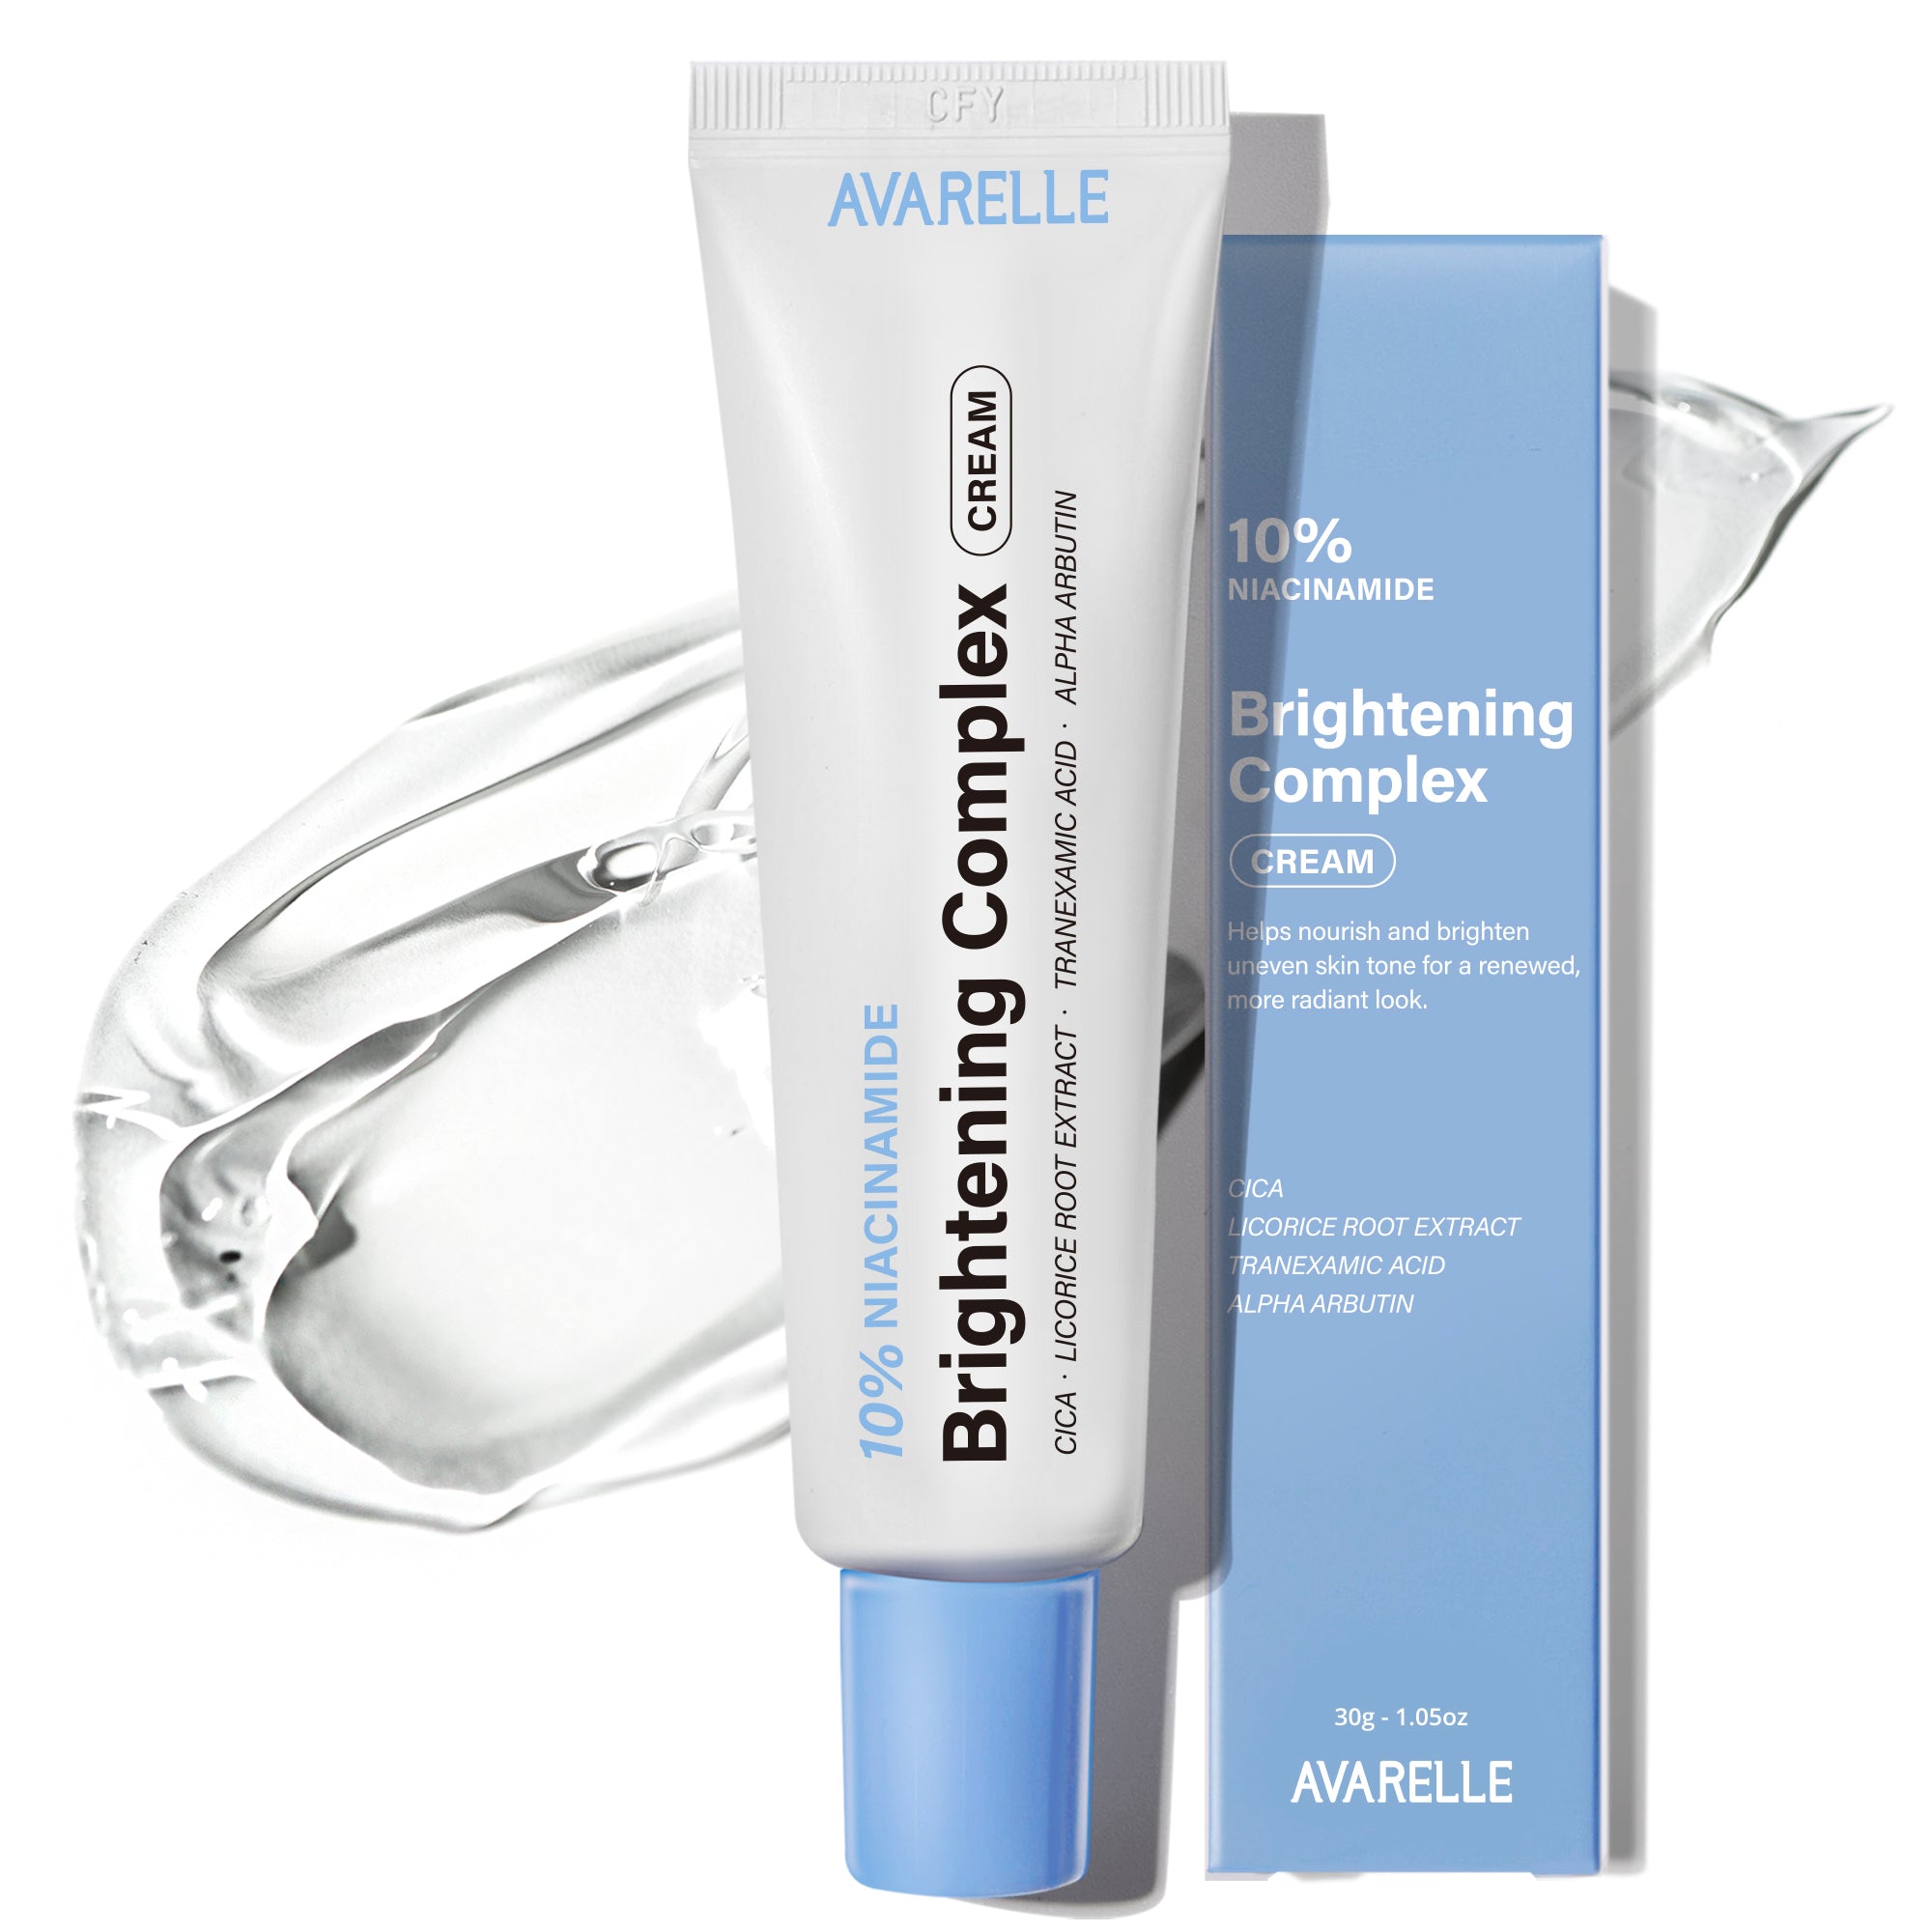 A tube of Avarelle's 10% Niacinamide Brightening Complex with niacinamide, including the 10% niacinamide complex packaging that calms & moisturizes the skin.